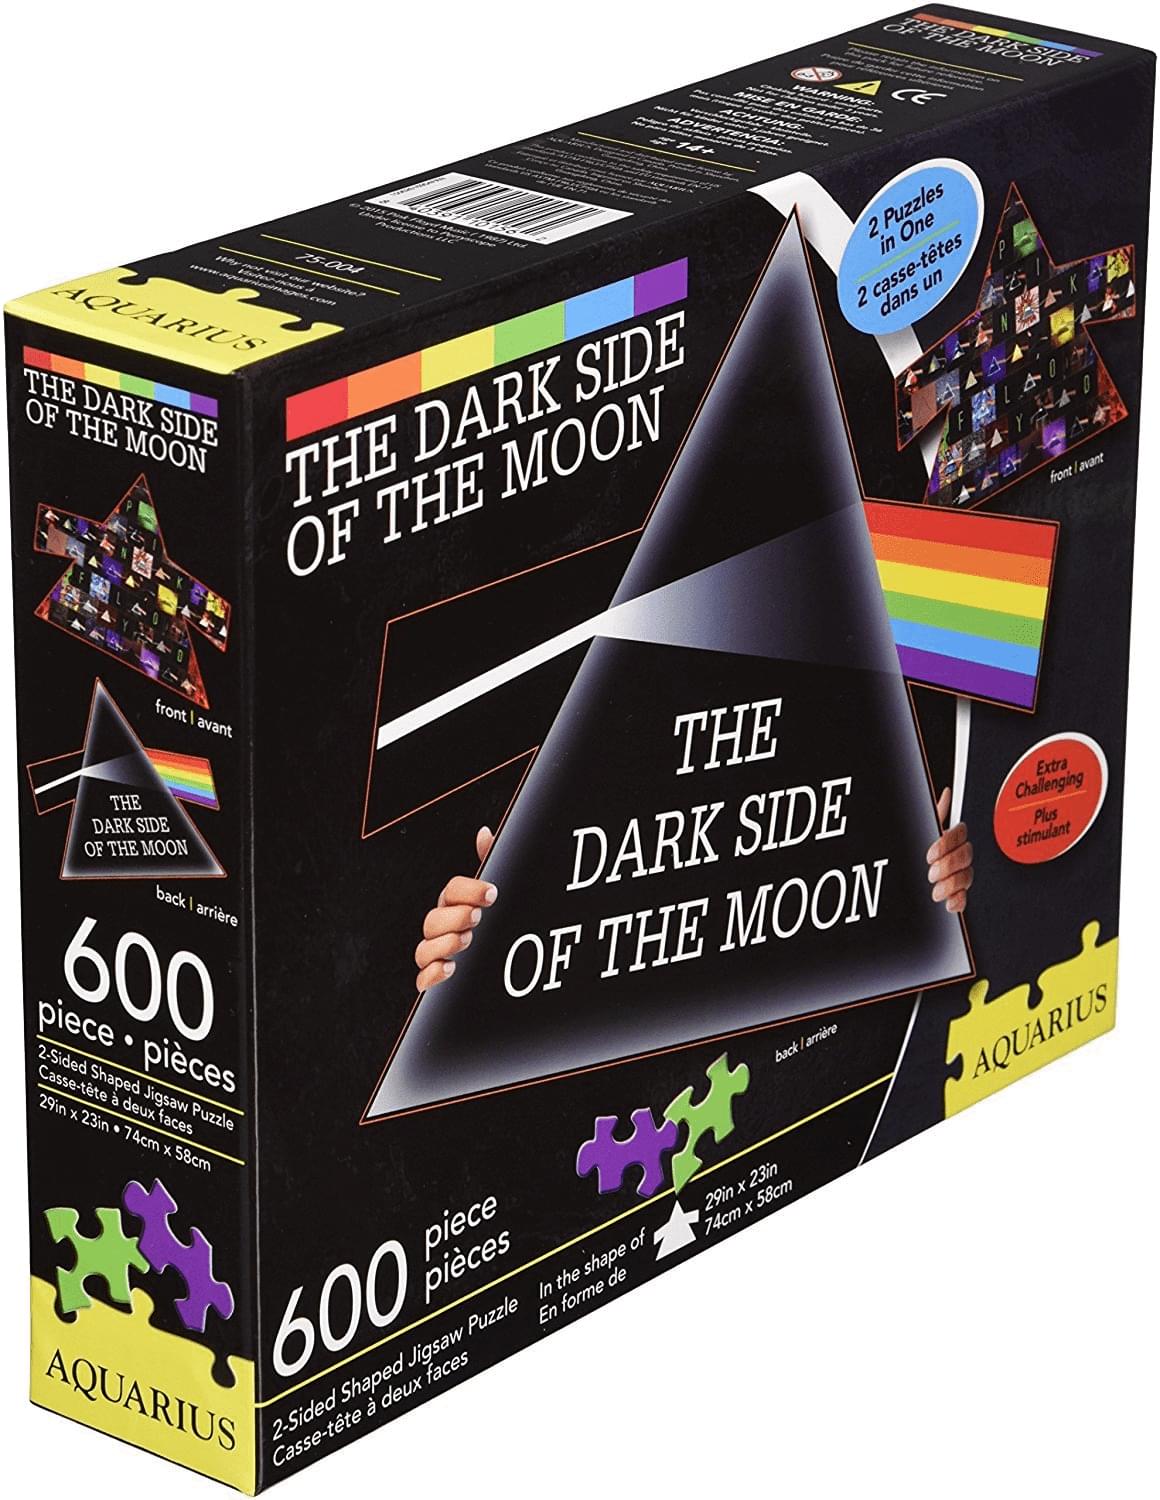 Pink Floyd Dark Side of the Moon 600 Piece Shaped 2 Sided Jigsaw Puzzle